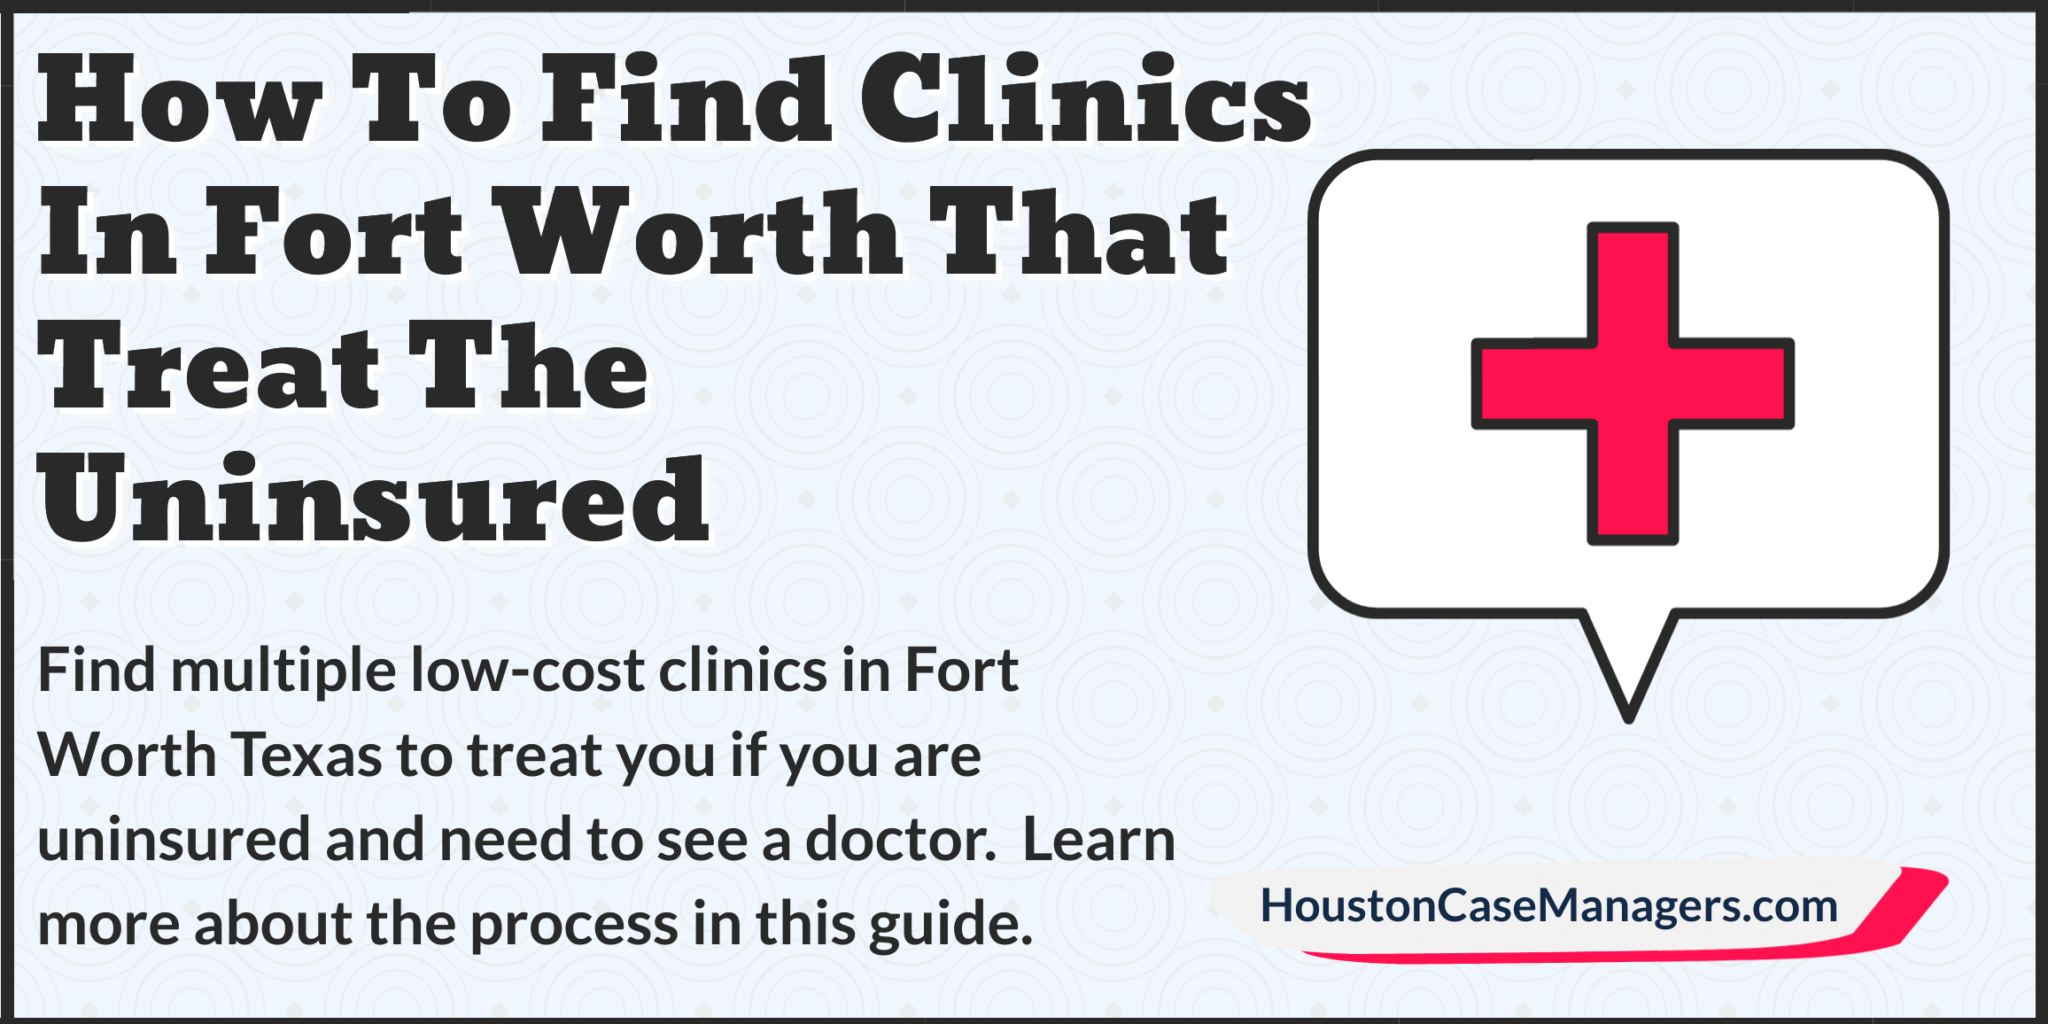 51 Affordable Medical Clinics In Fort Worth That Treat The Uninsured